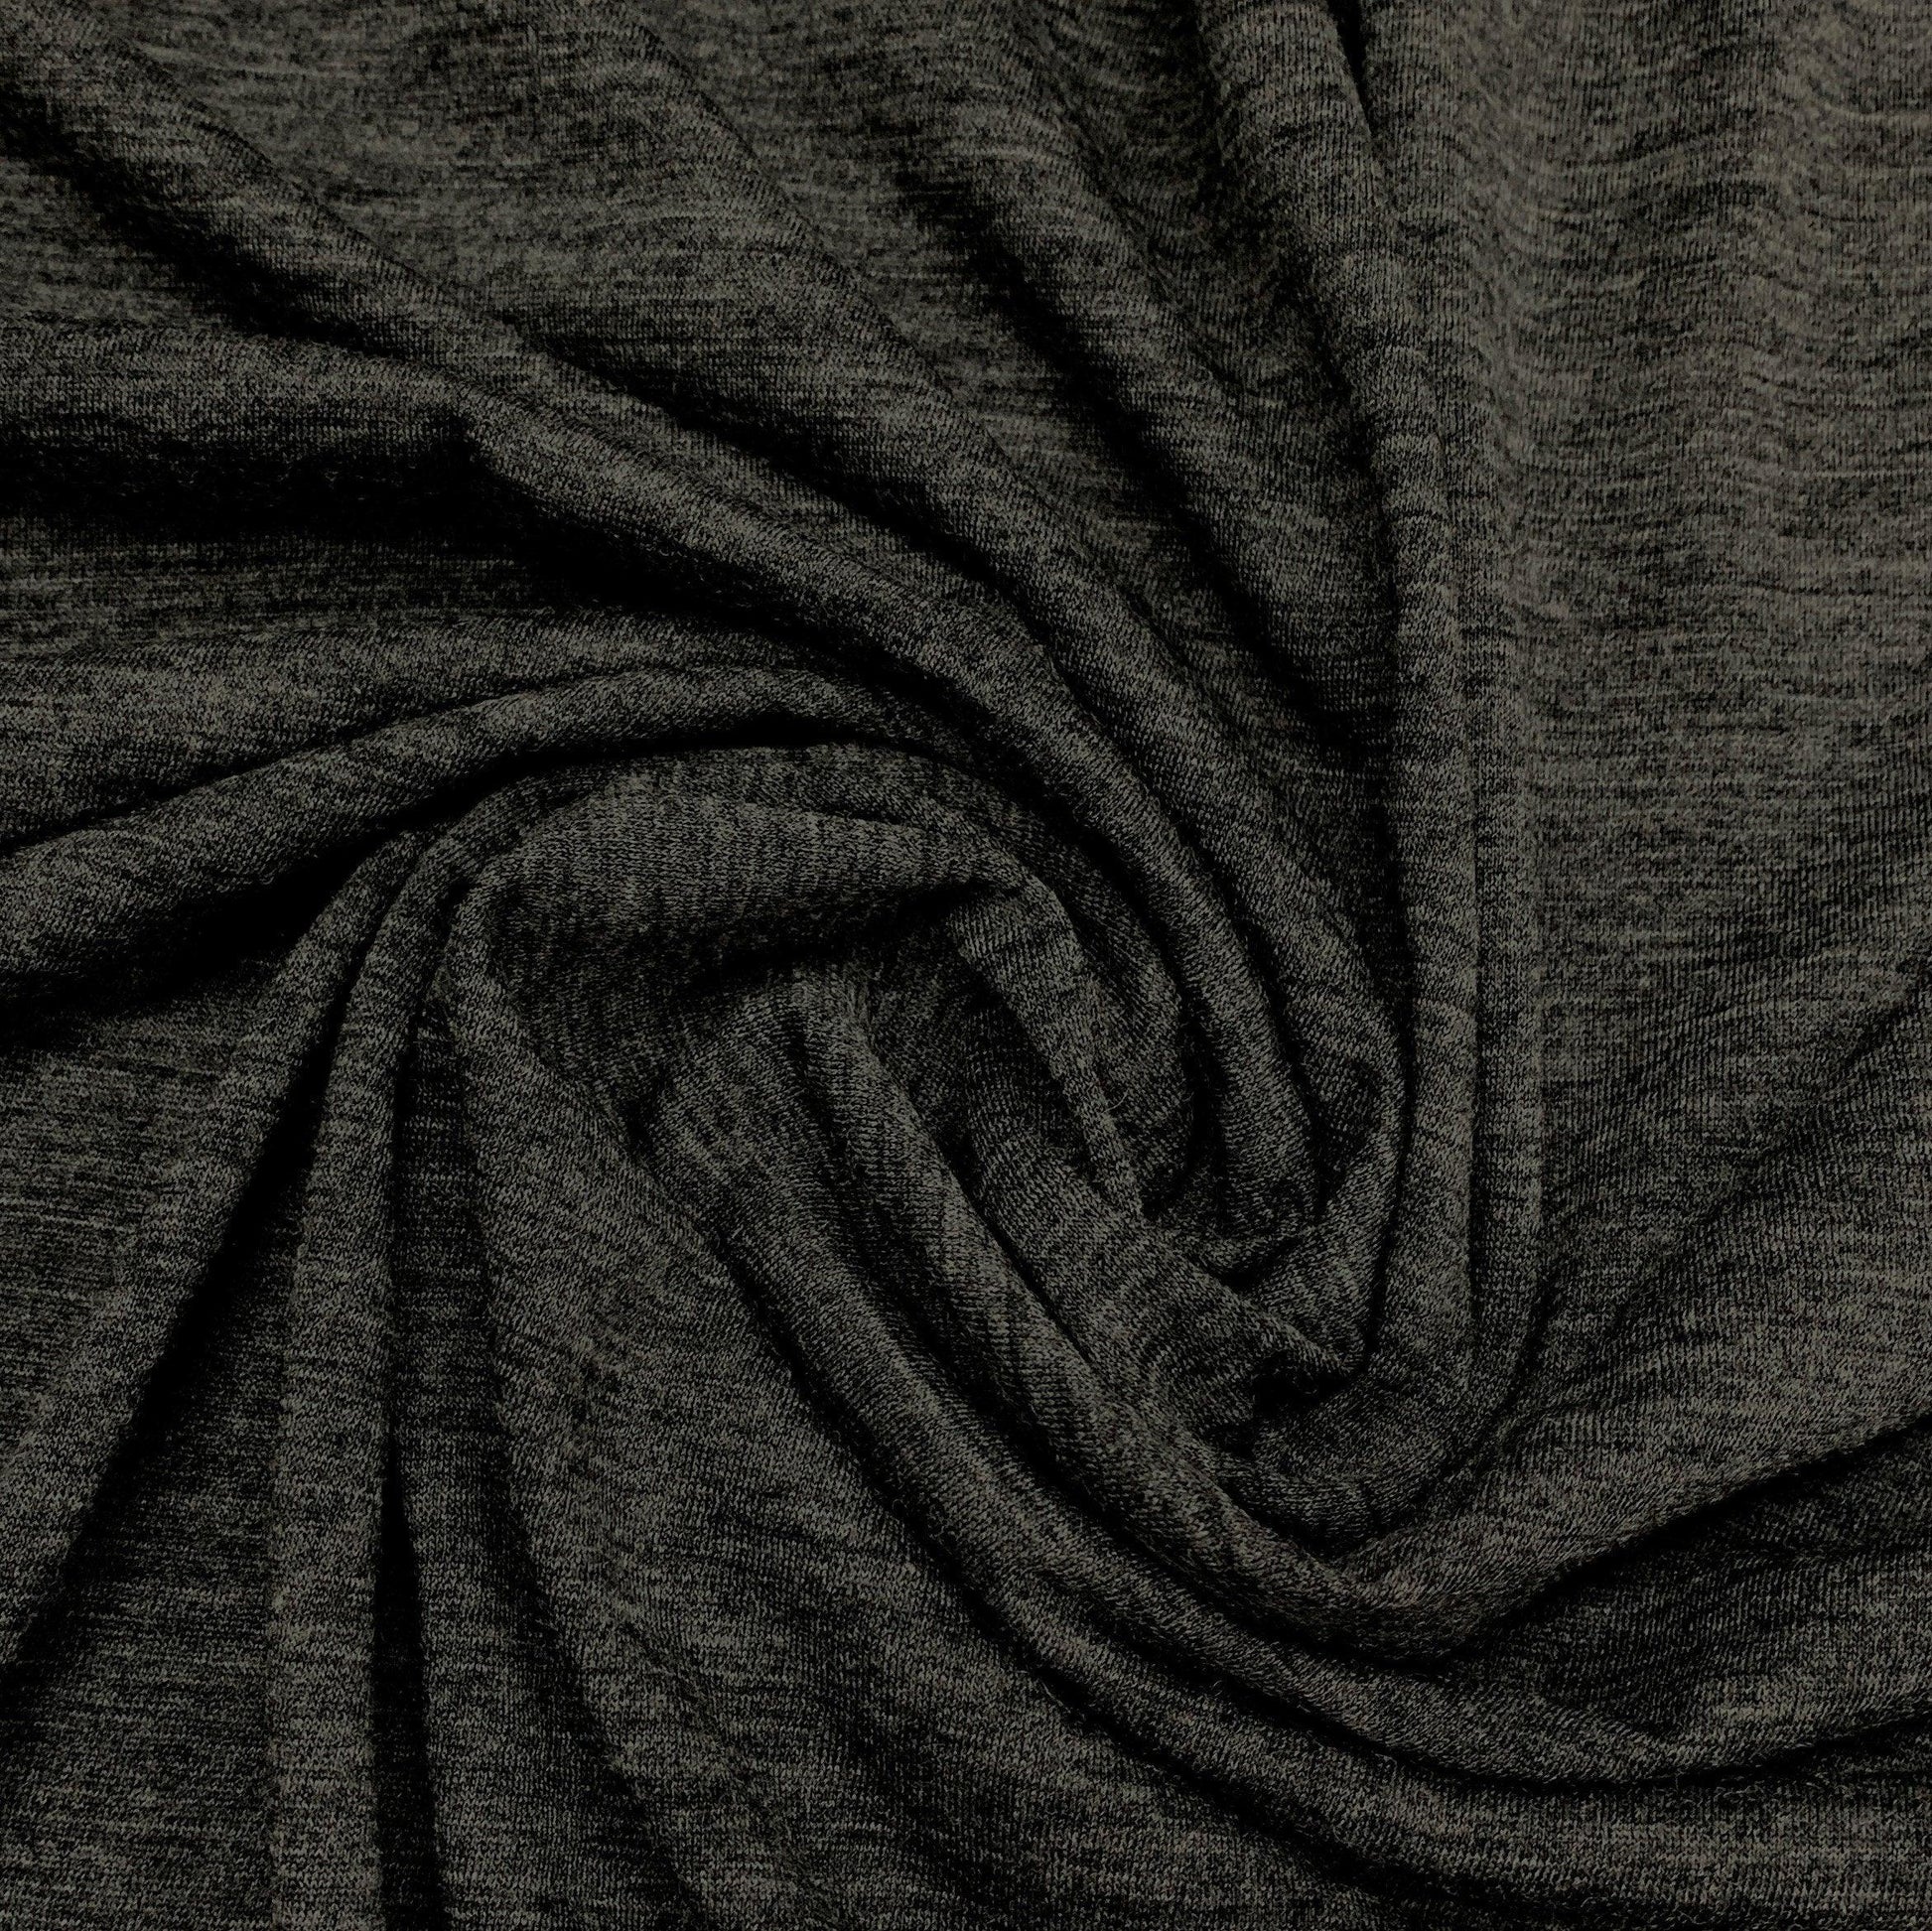 Charcoal Gray Cotton Jersey Fabric